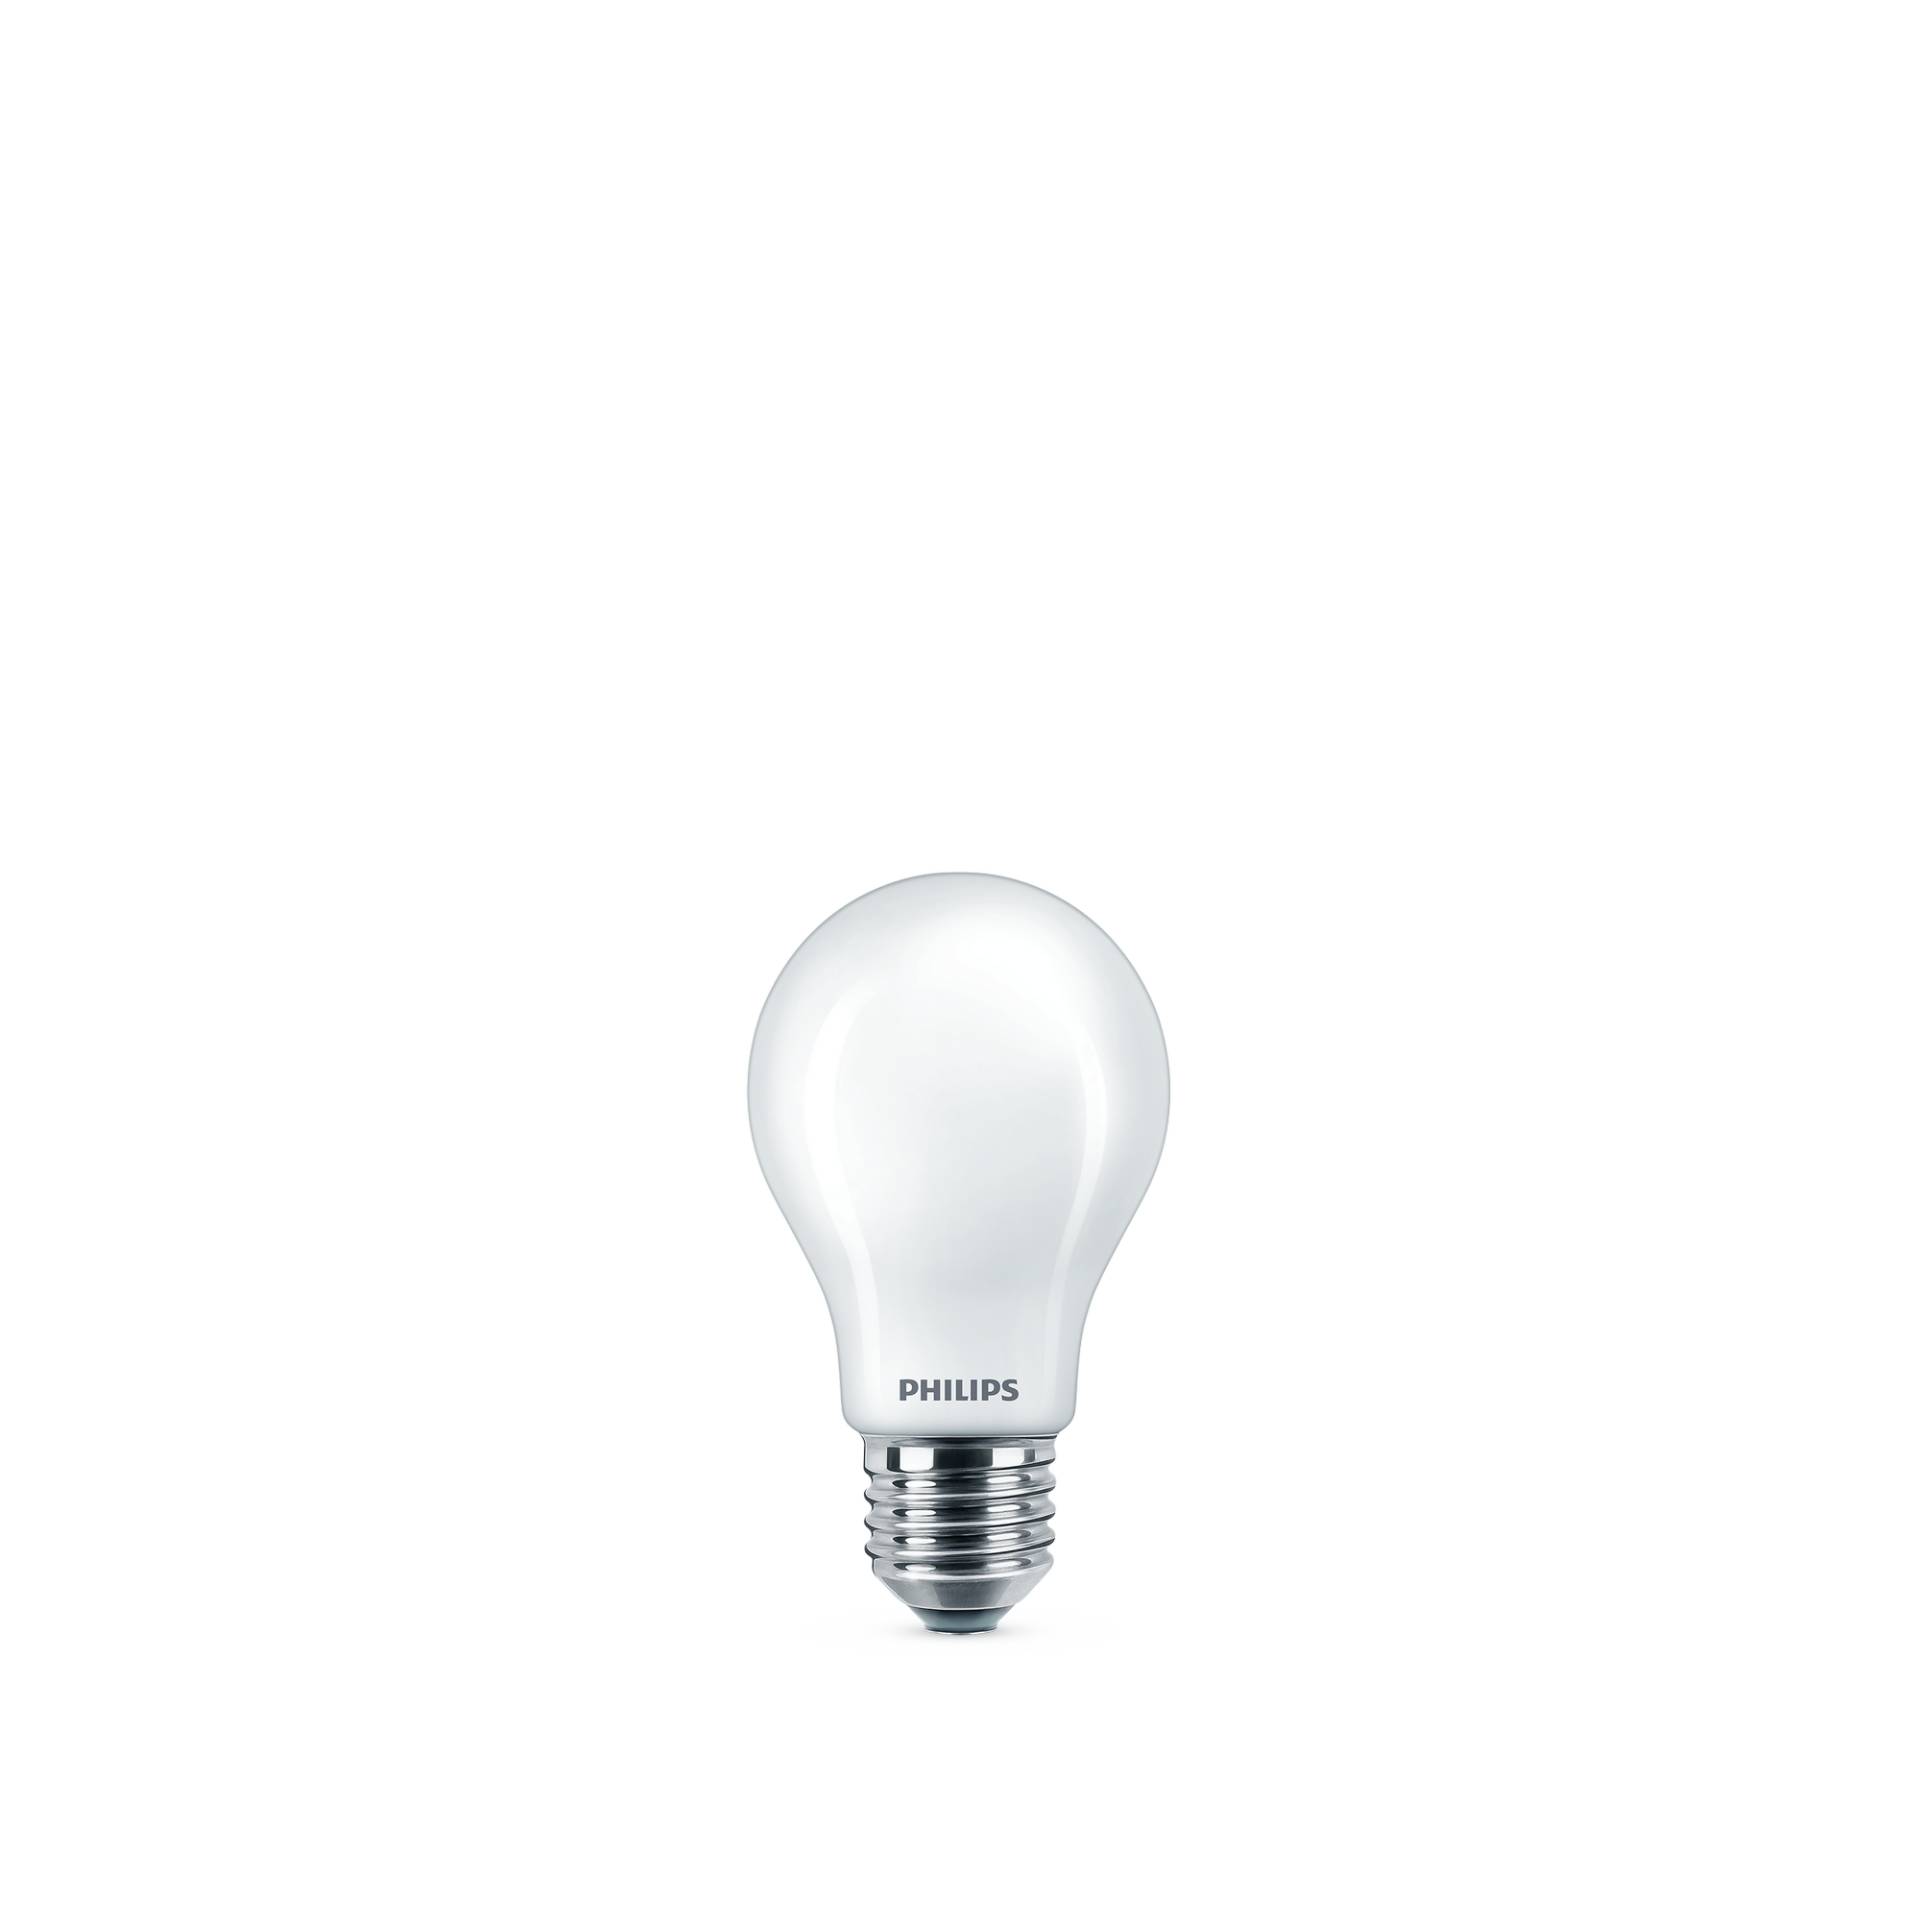 Philips LED-Lampe 'Warmglow' Glühlampe E27 475 lm von Philips